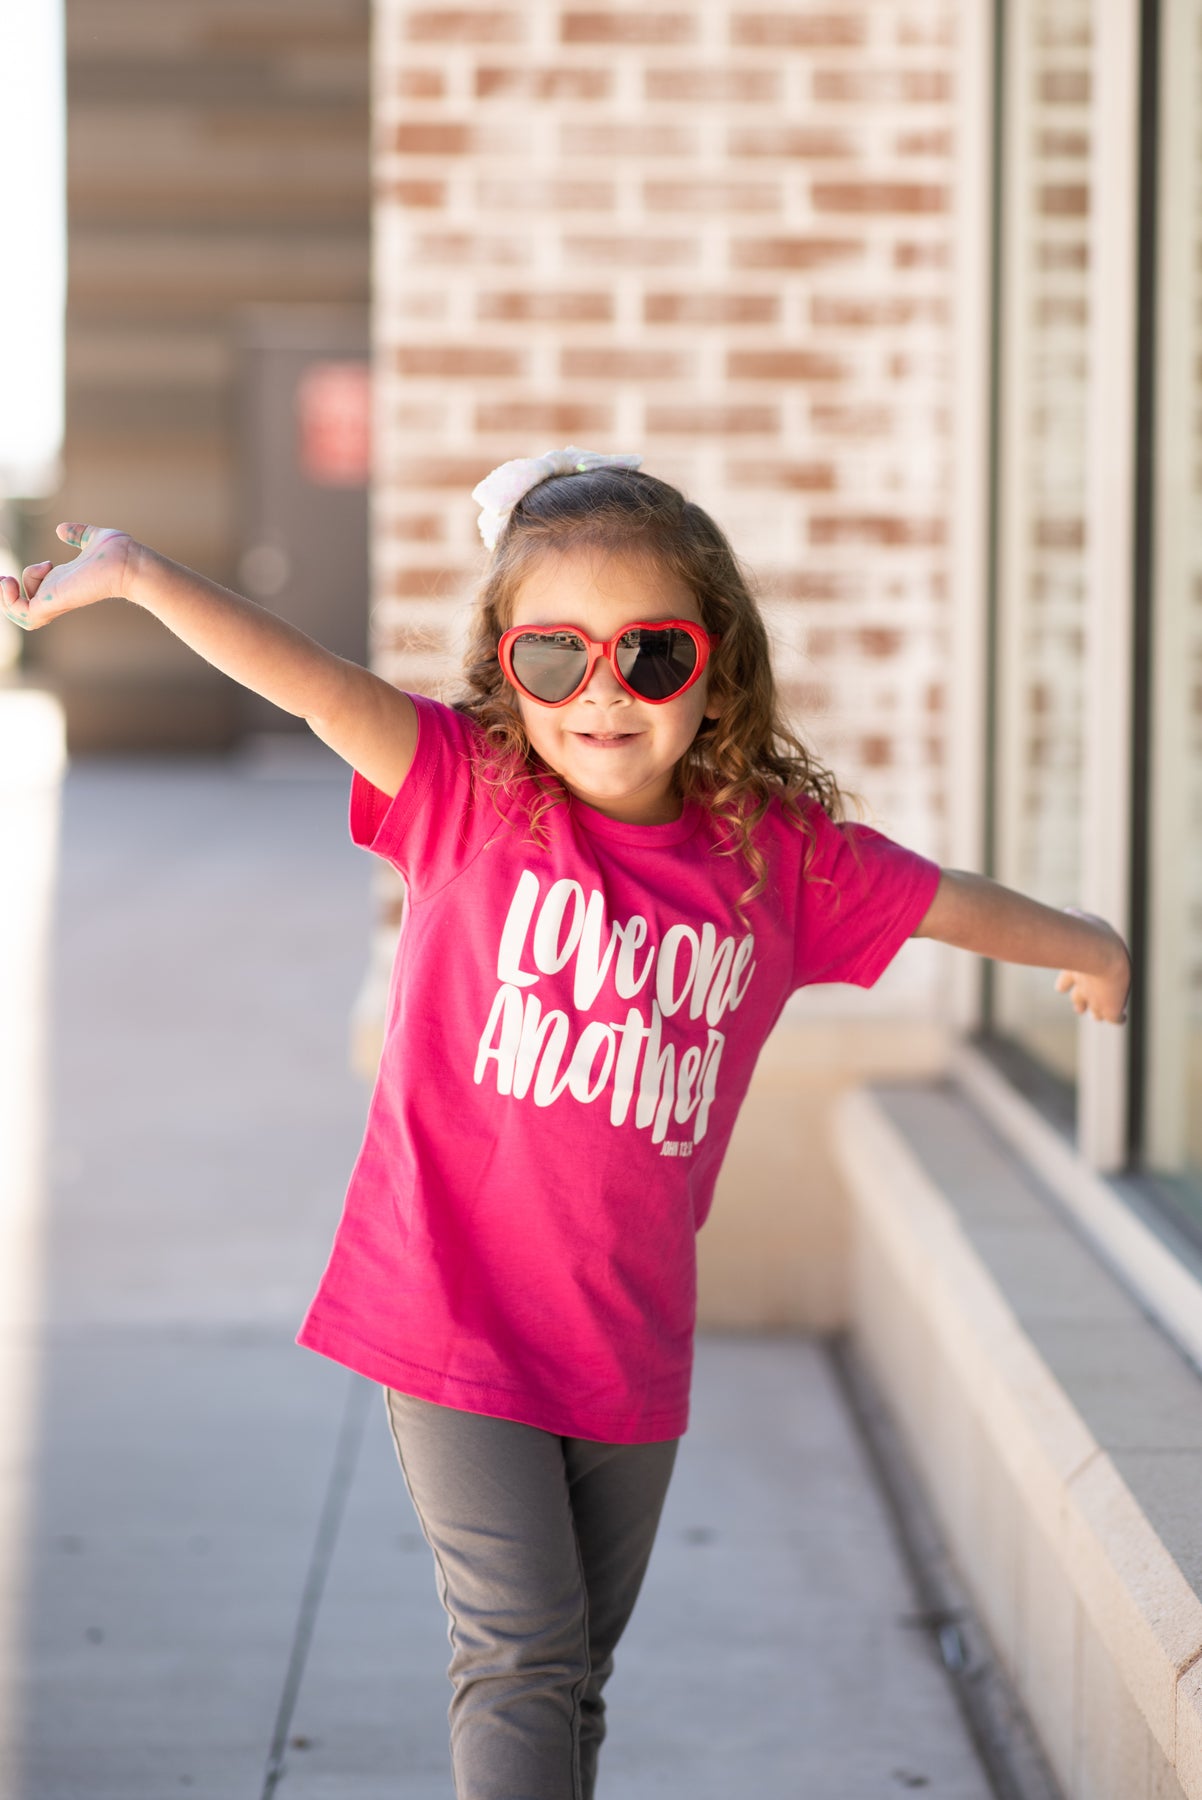 Love One Another Tee – His Kids Company